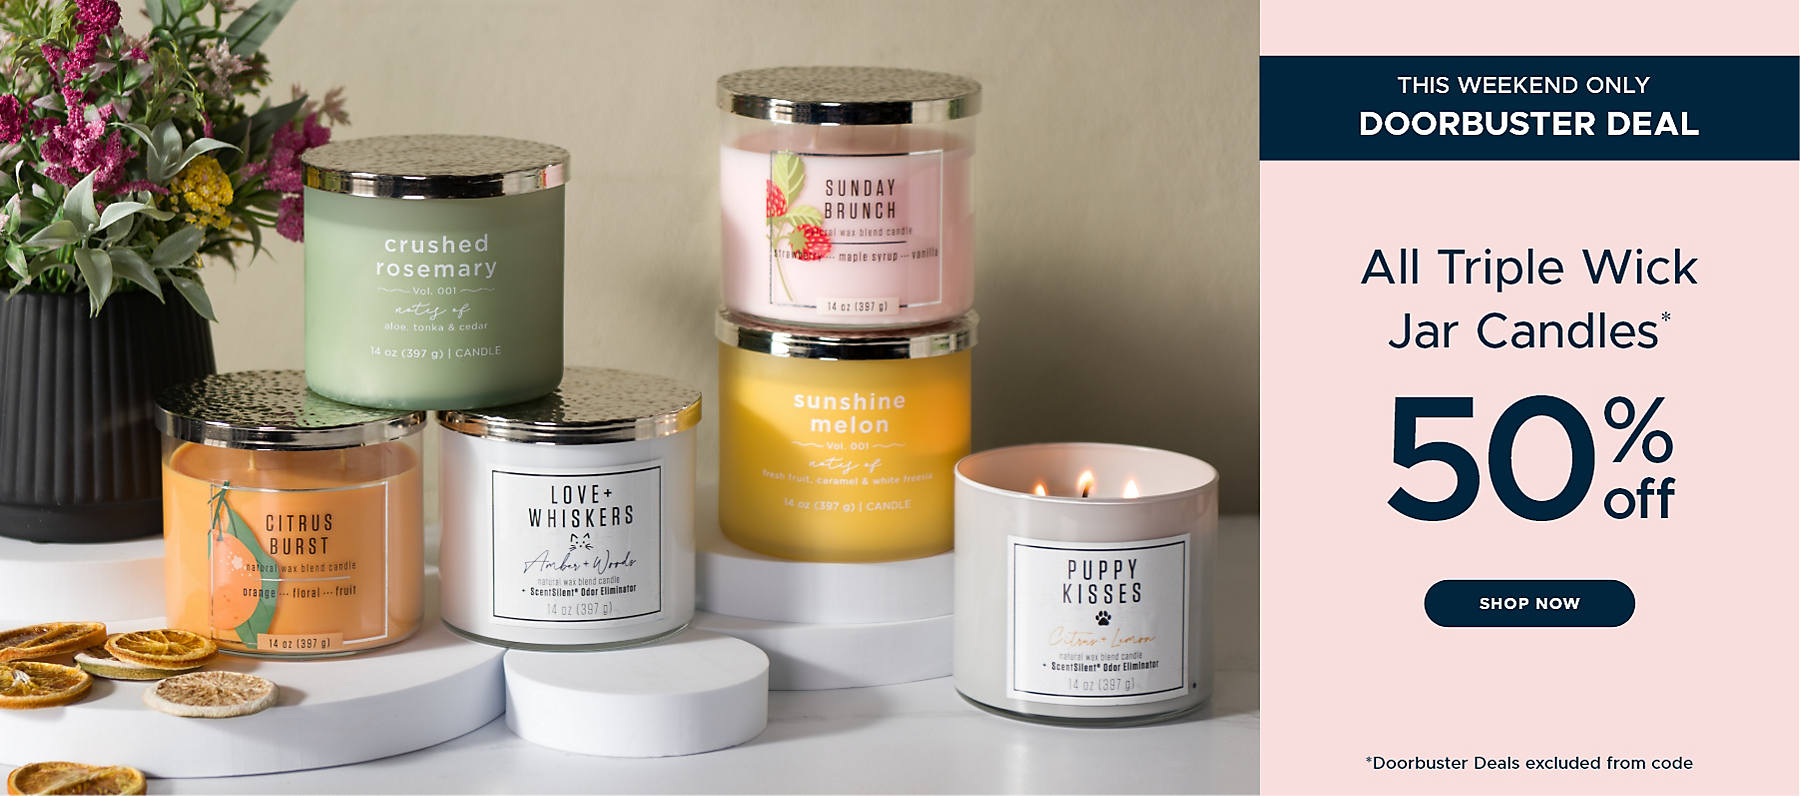 This Weekend Only Doorbuster Deal All Triple Wick Jar Candles* 50% off Shop Now *Doorbuster Deals excluded from code